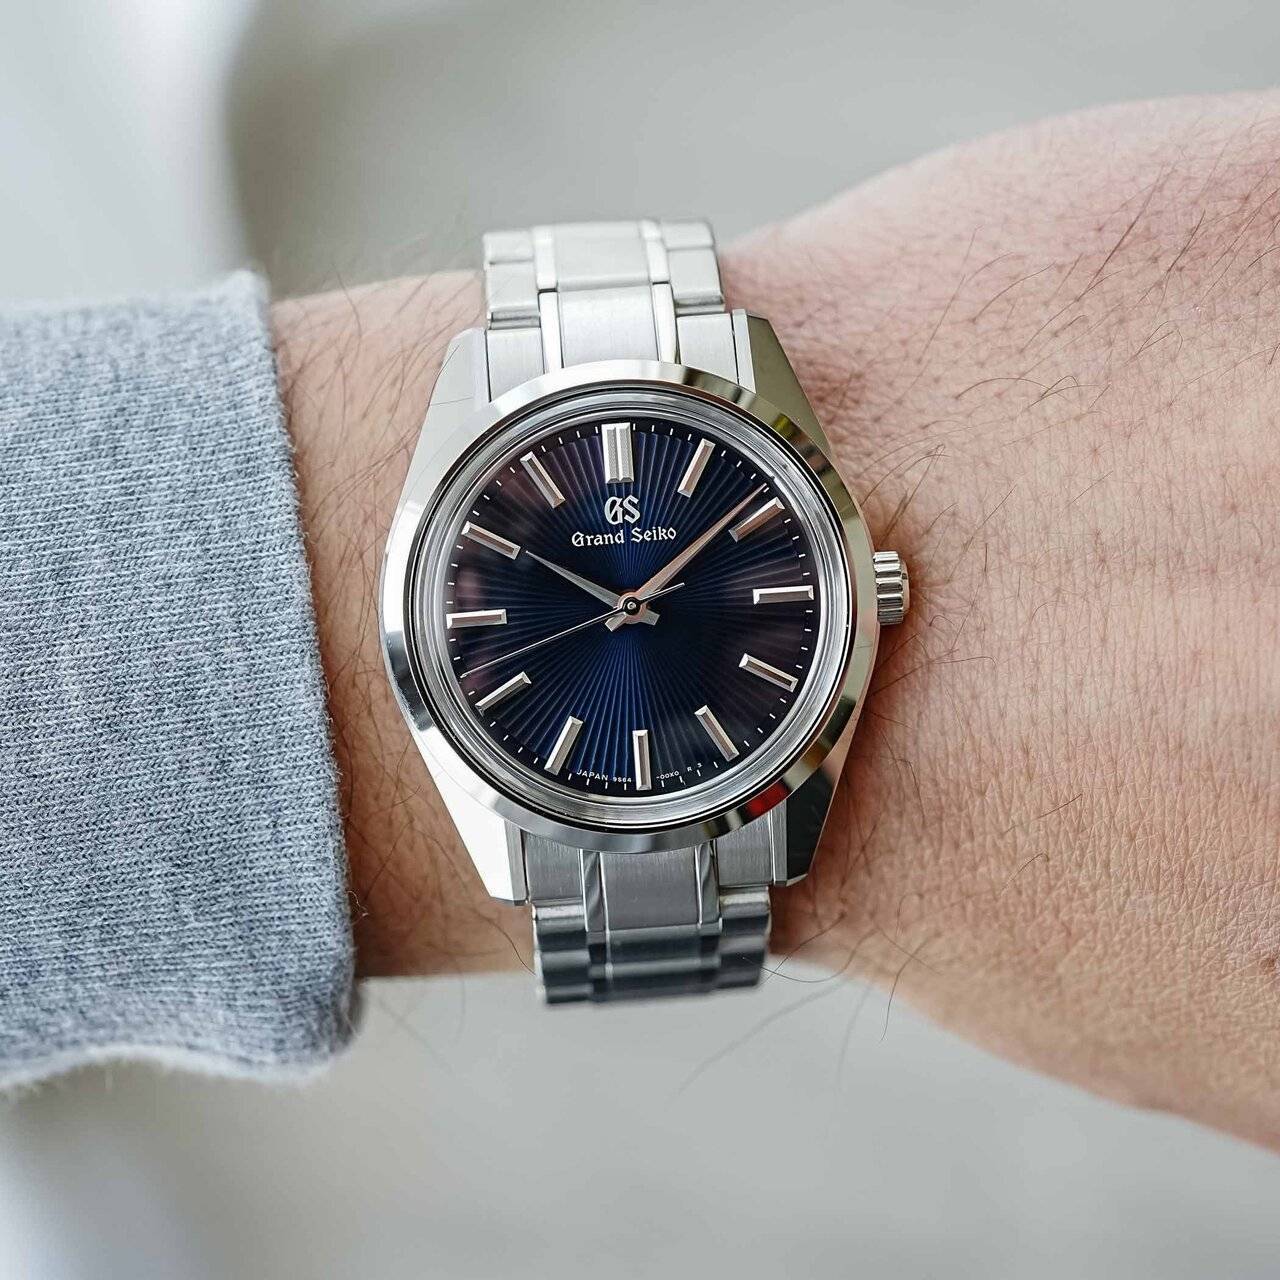 Grand-Seiko-Heritage-44GS-36.5mm-Sensu-Japanese-Fans-SBGW297-and-SBGW299-hand-wound-hands-on-3.jpg